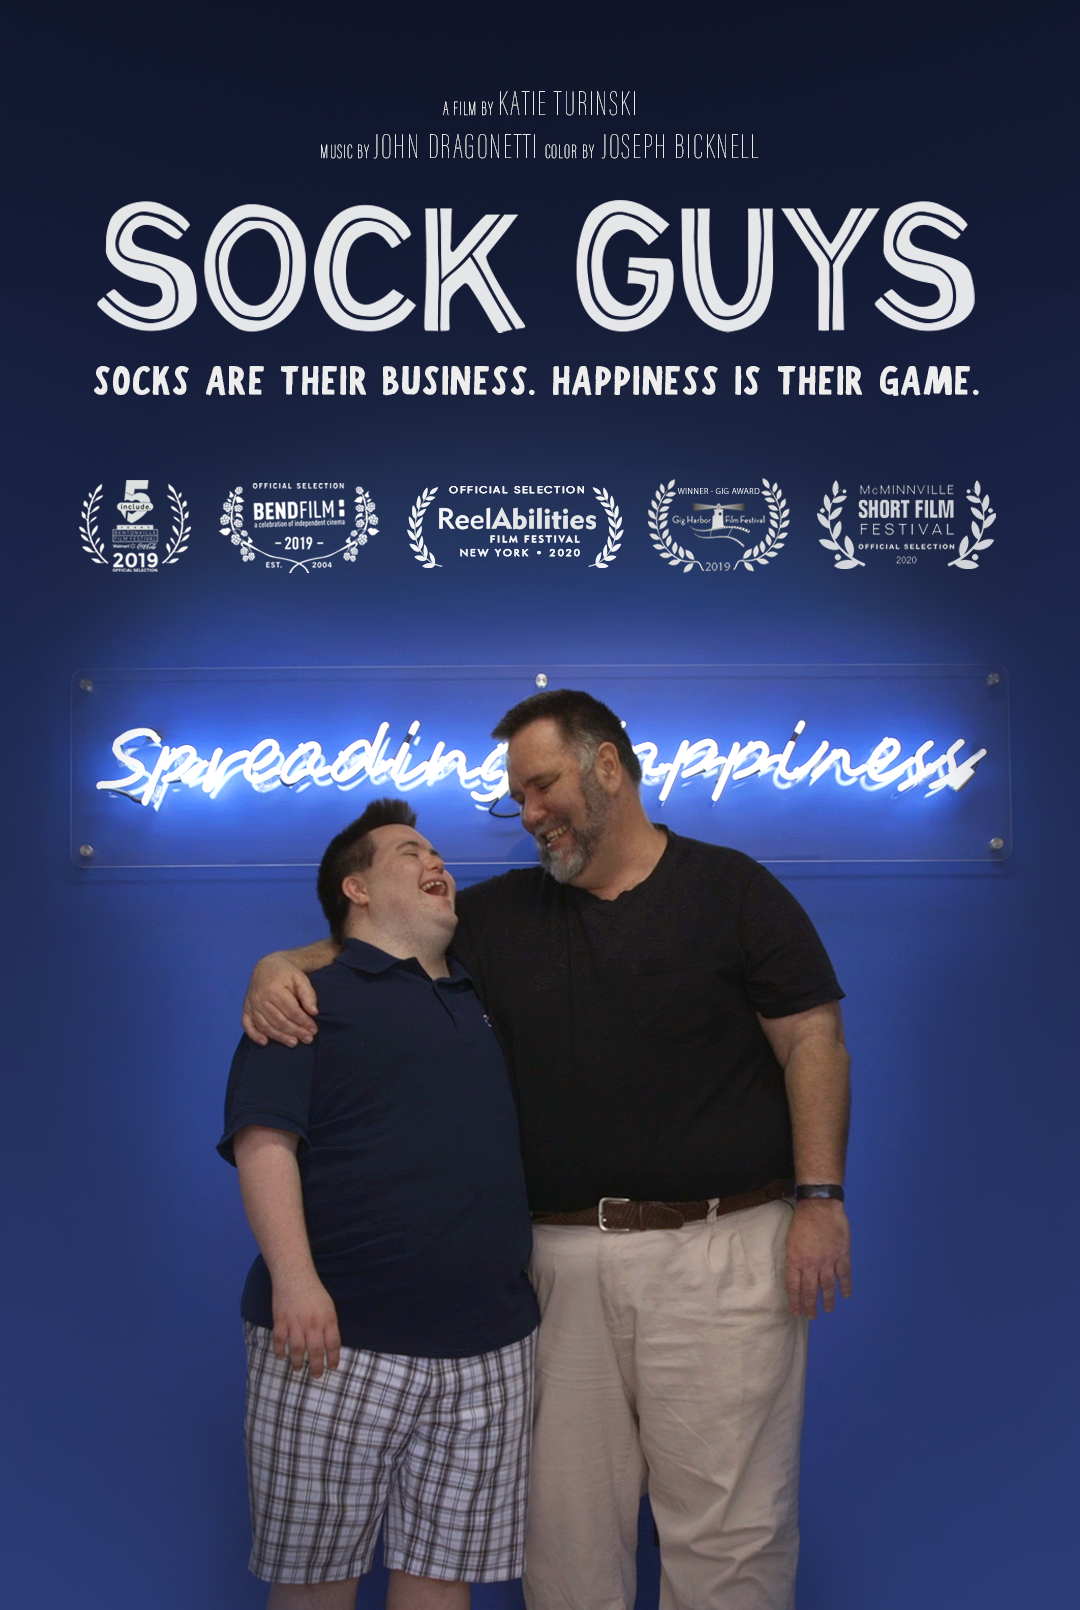 Sock Guys, the Award-Winning Documentary Short about John, His Father and John’s Crazy Socks, Is Now Available for All to See for Free